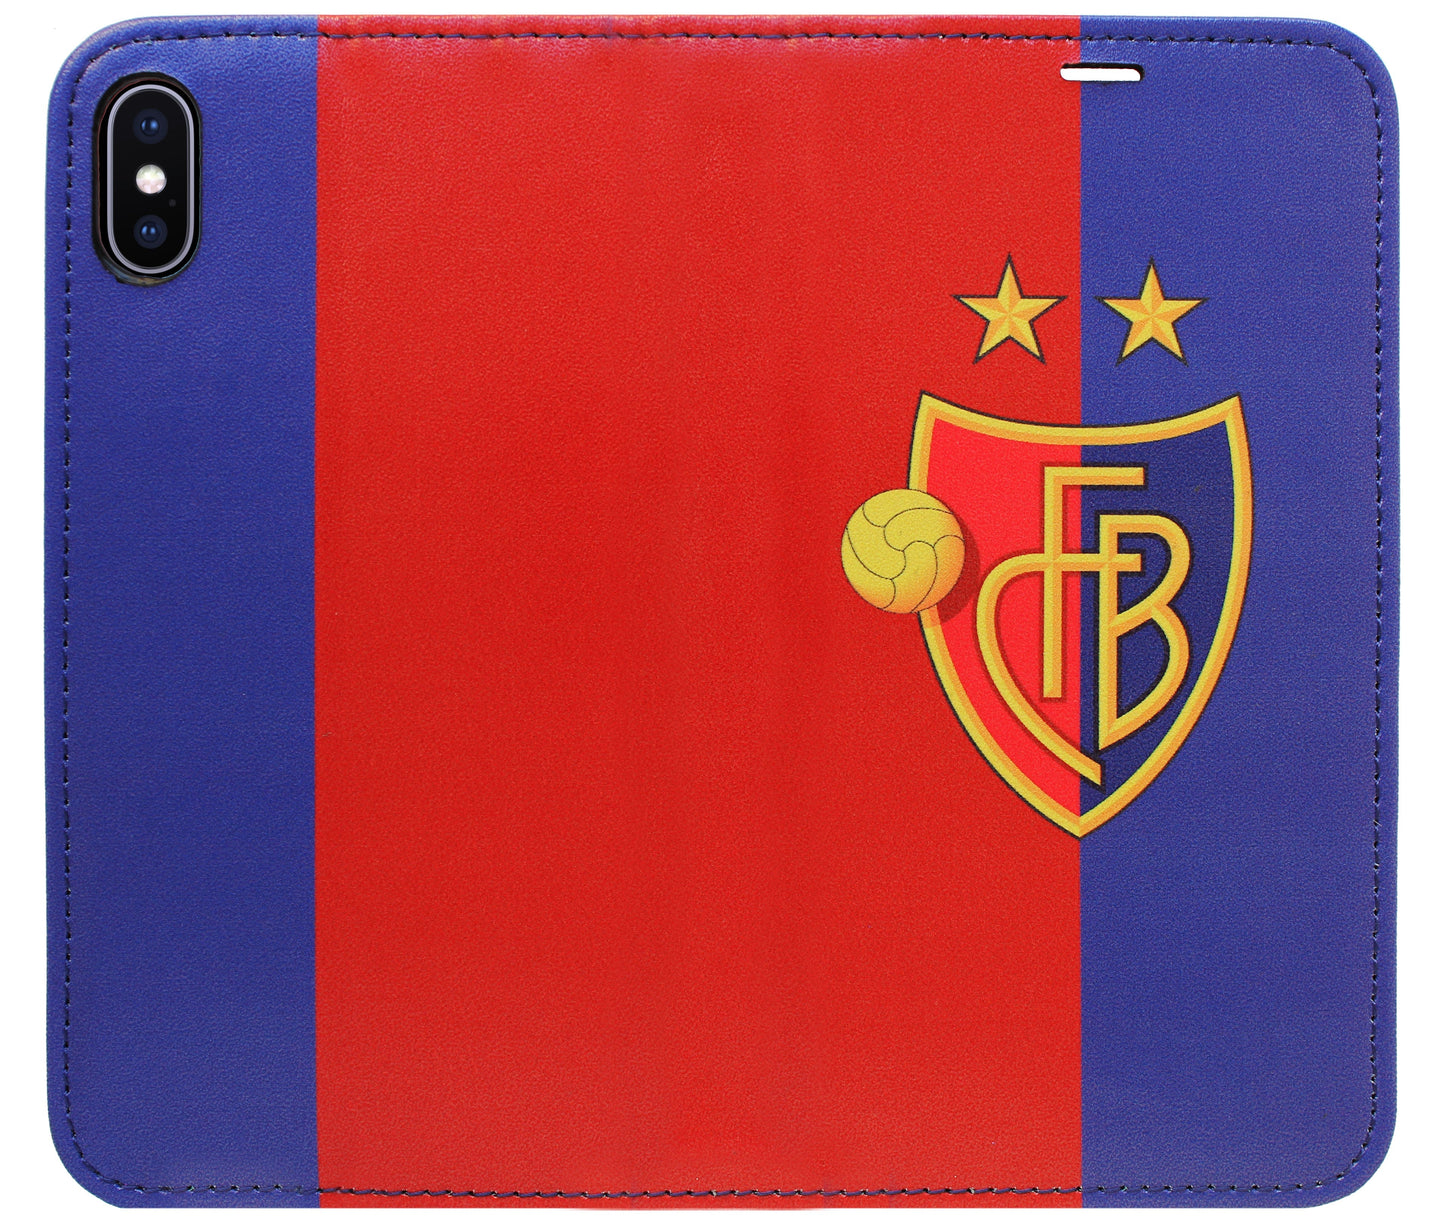 FCB Red / Blue Panorama Case for iPhone X/XS